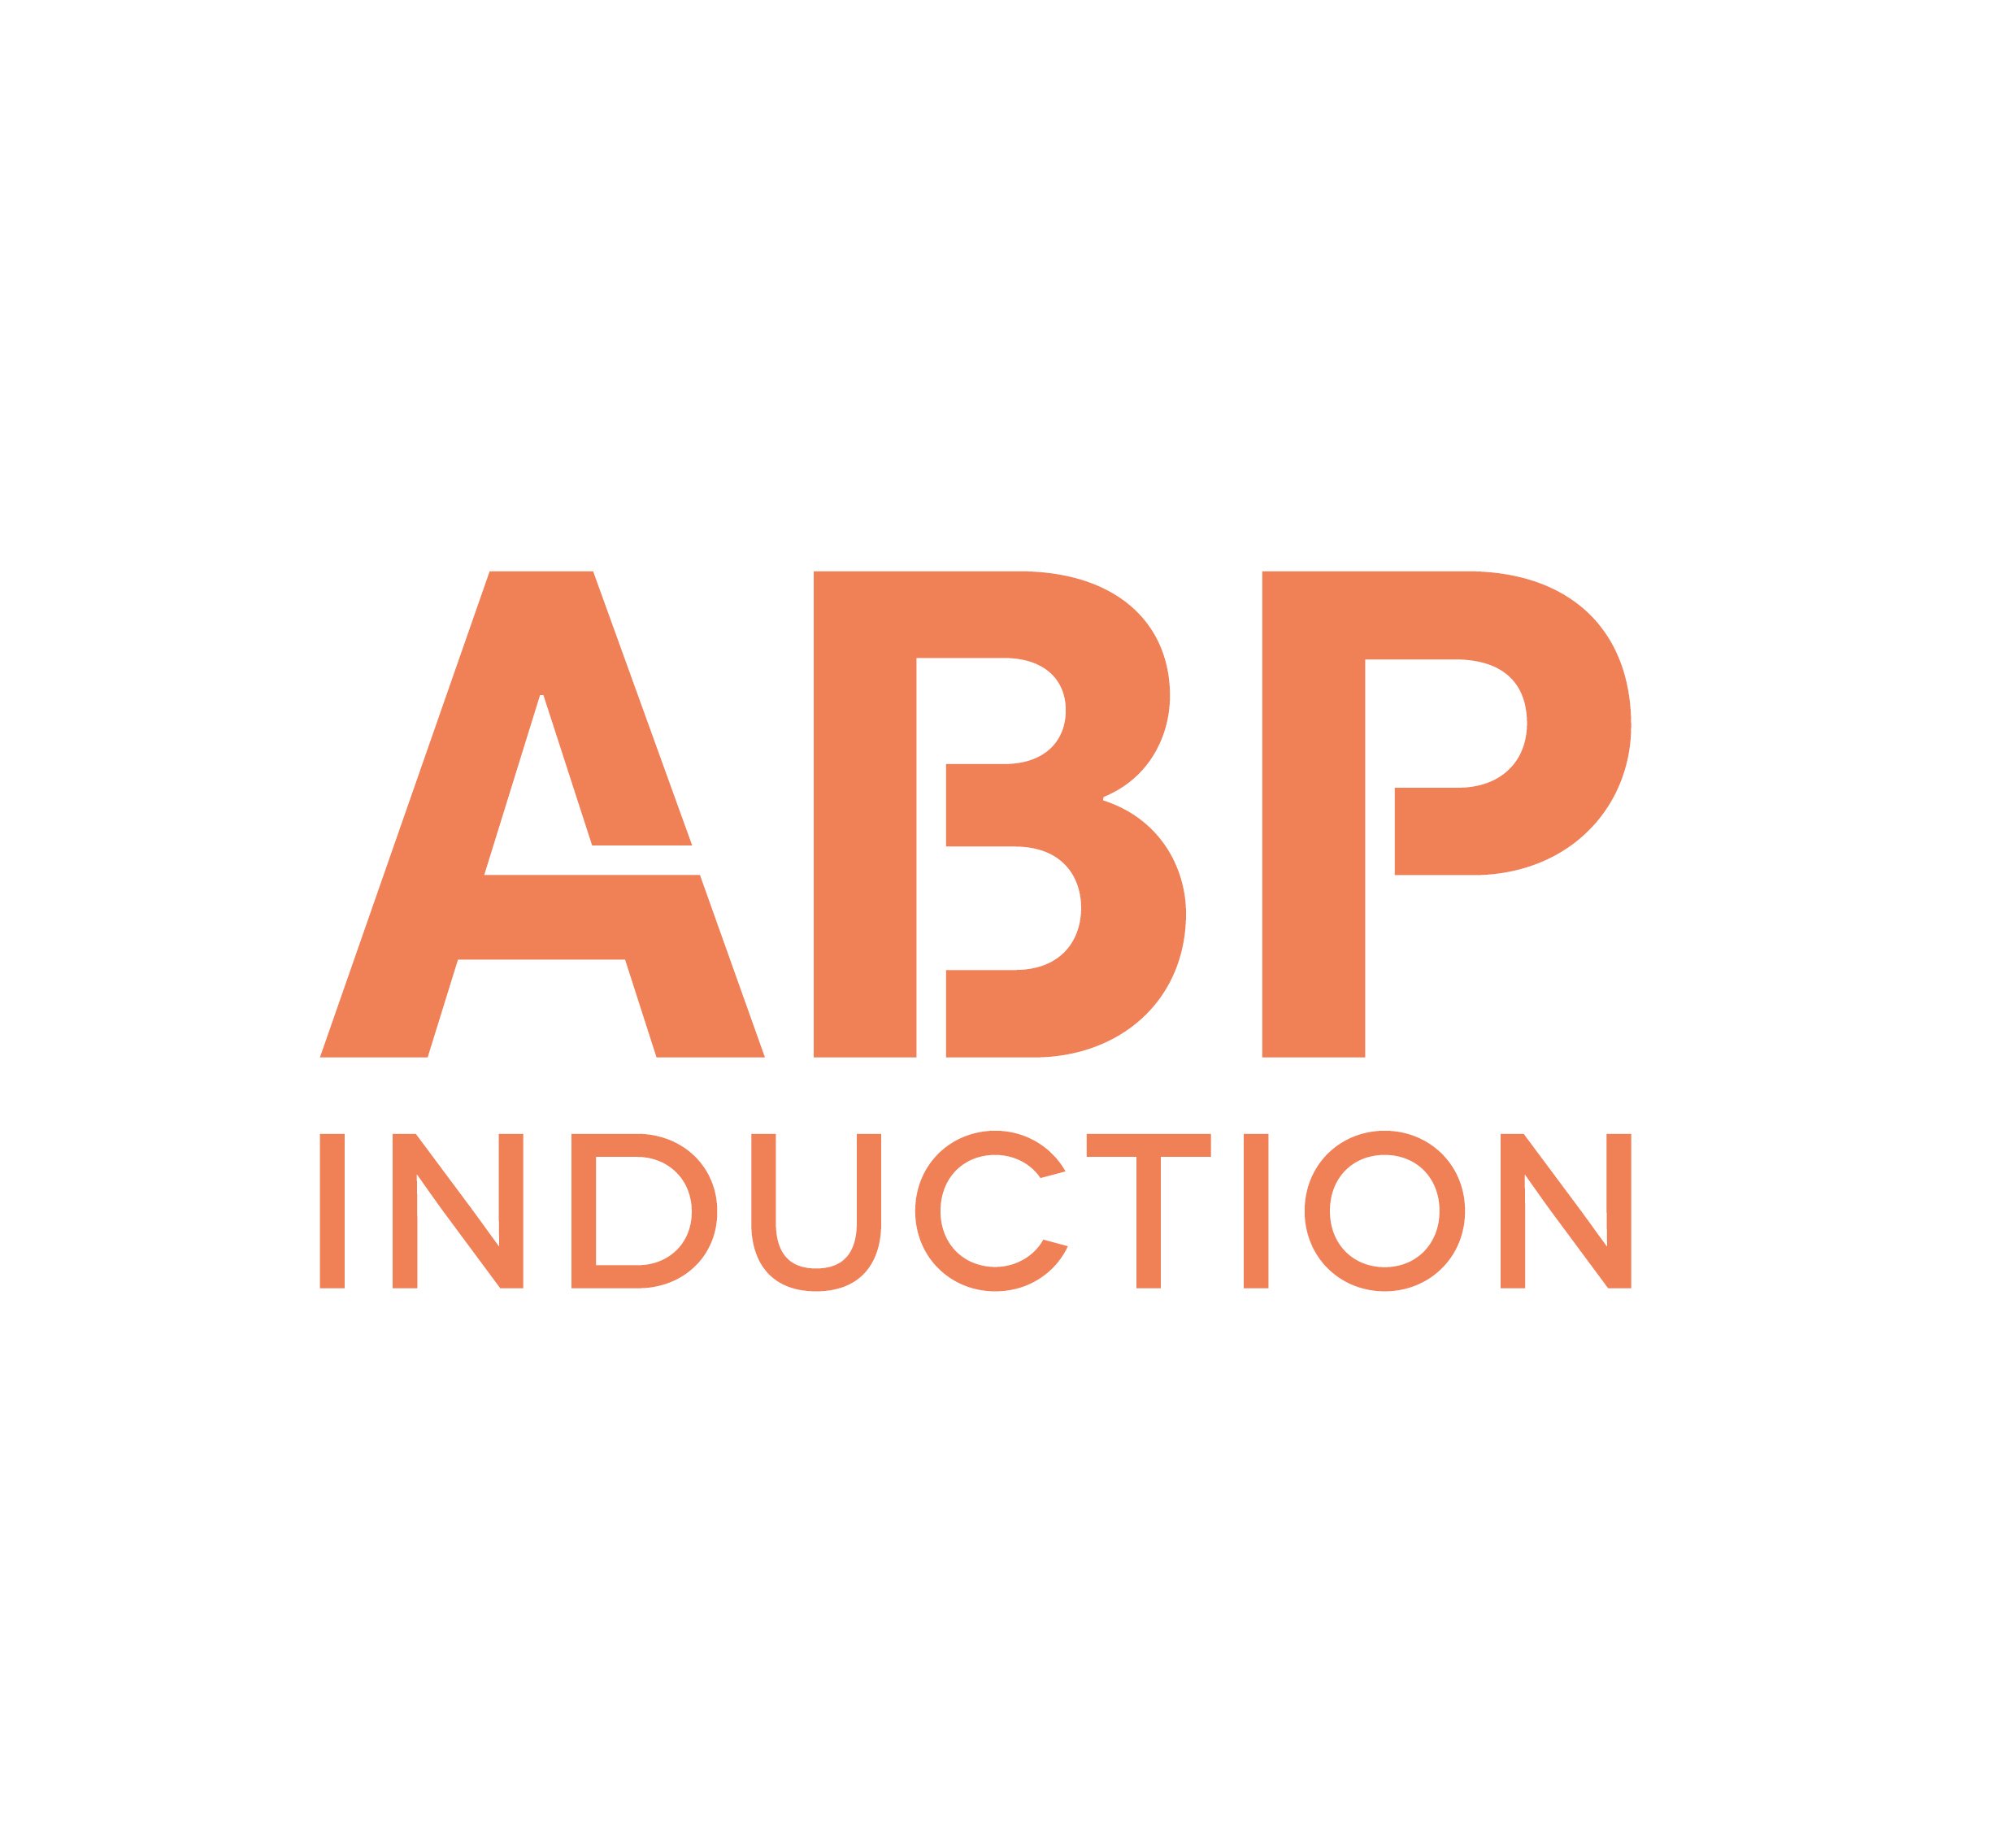 ABP is a leading supplier of induction furnaces and heating systems for the metals and metalworking industries.